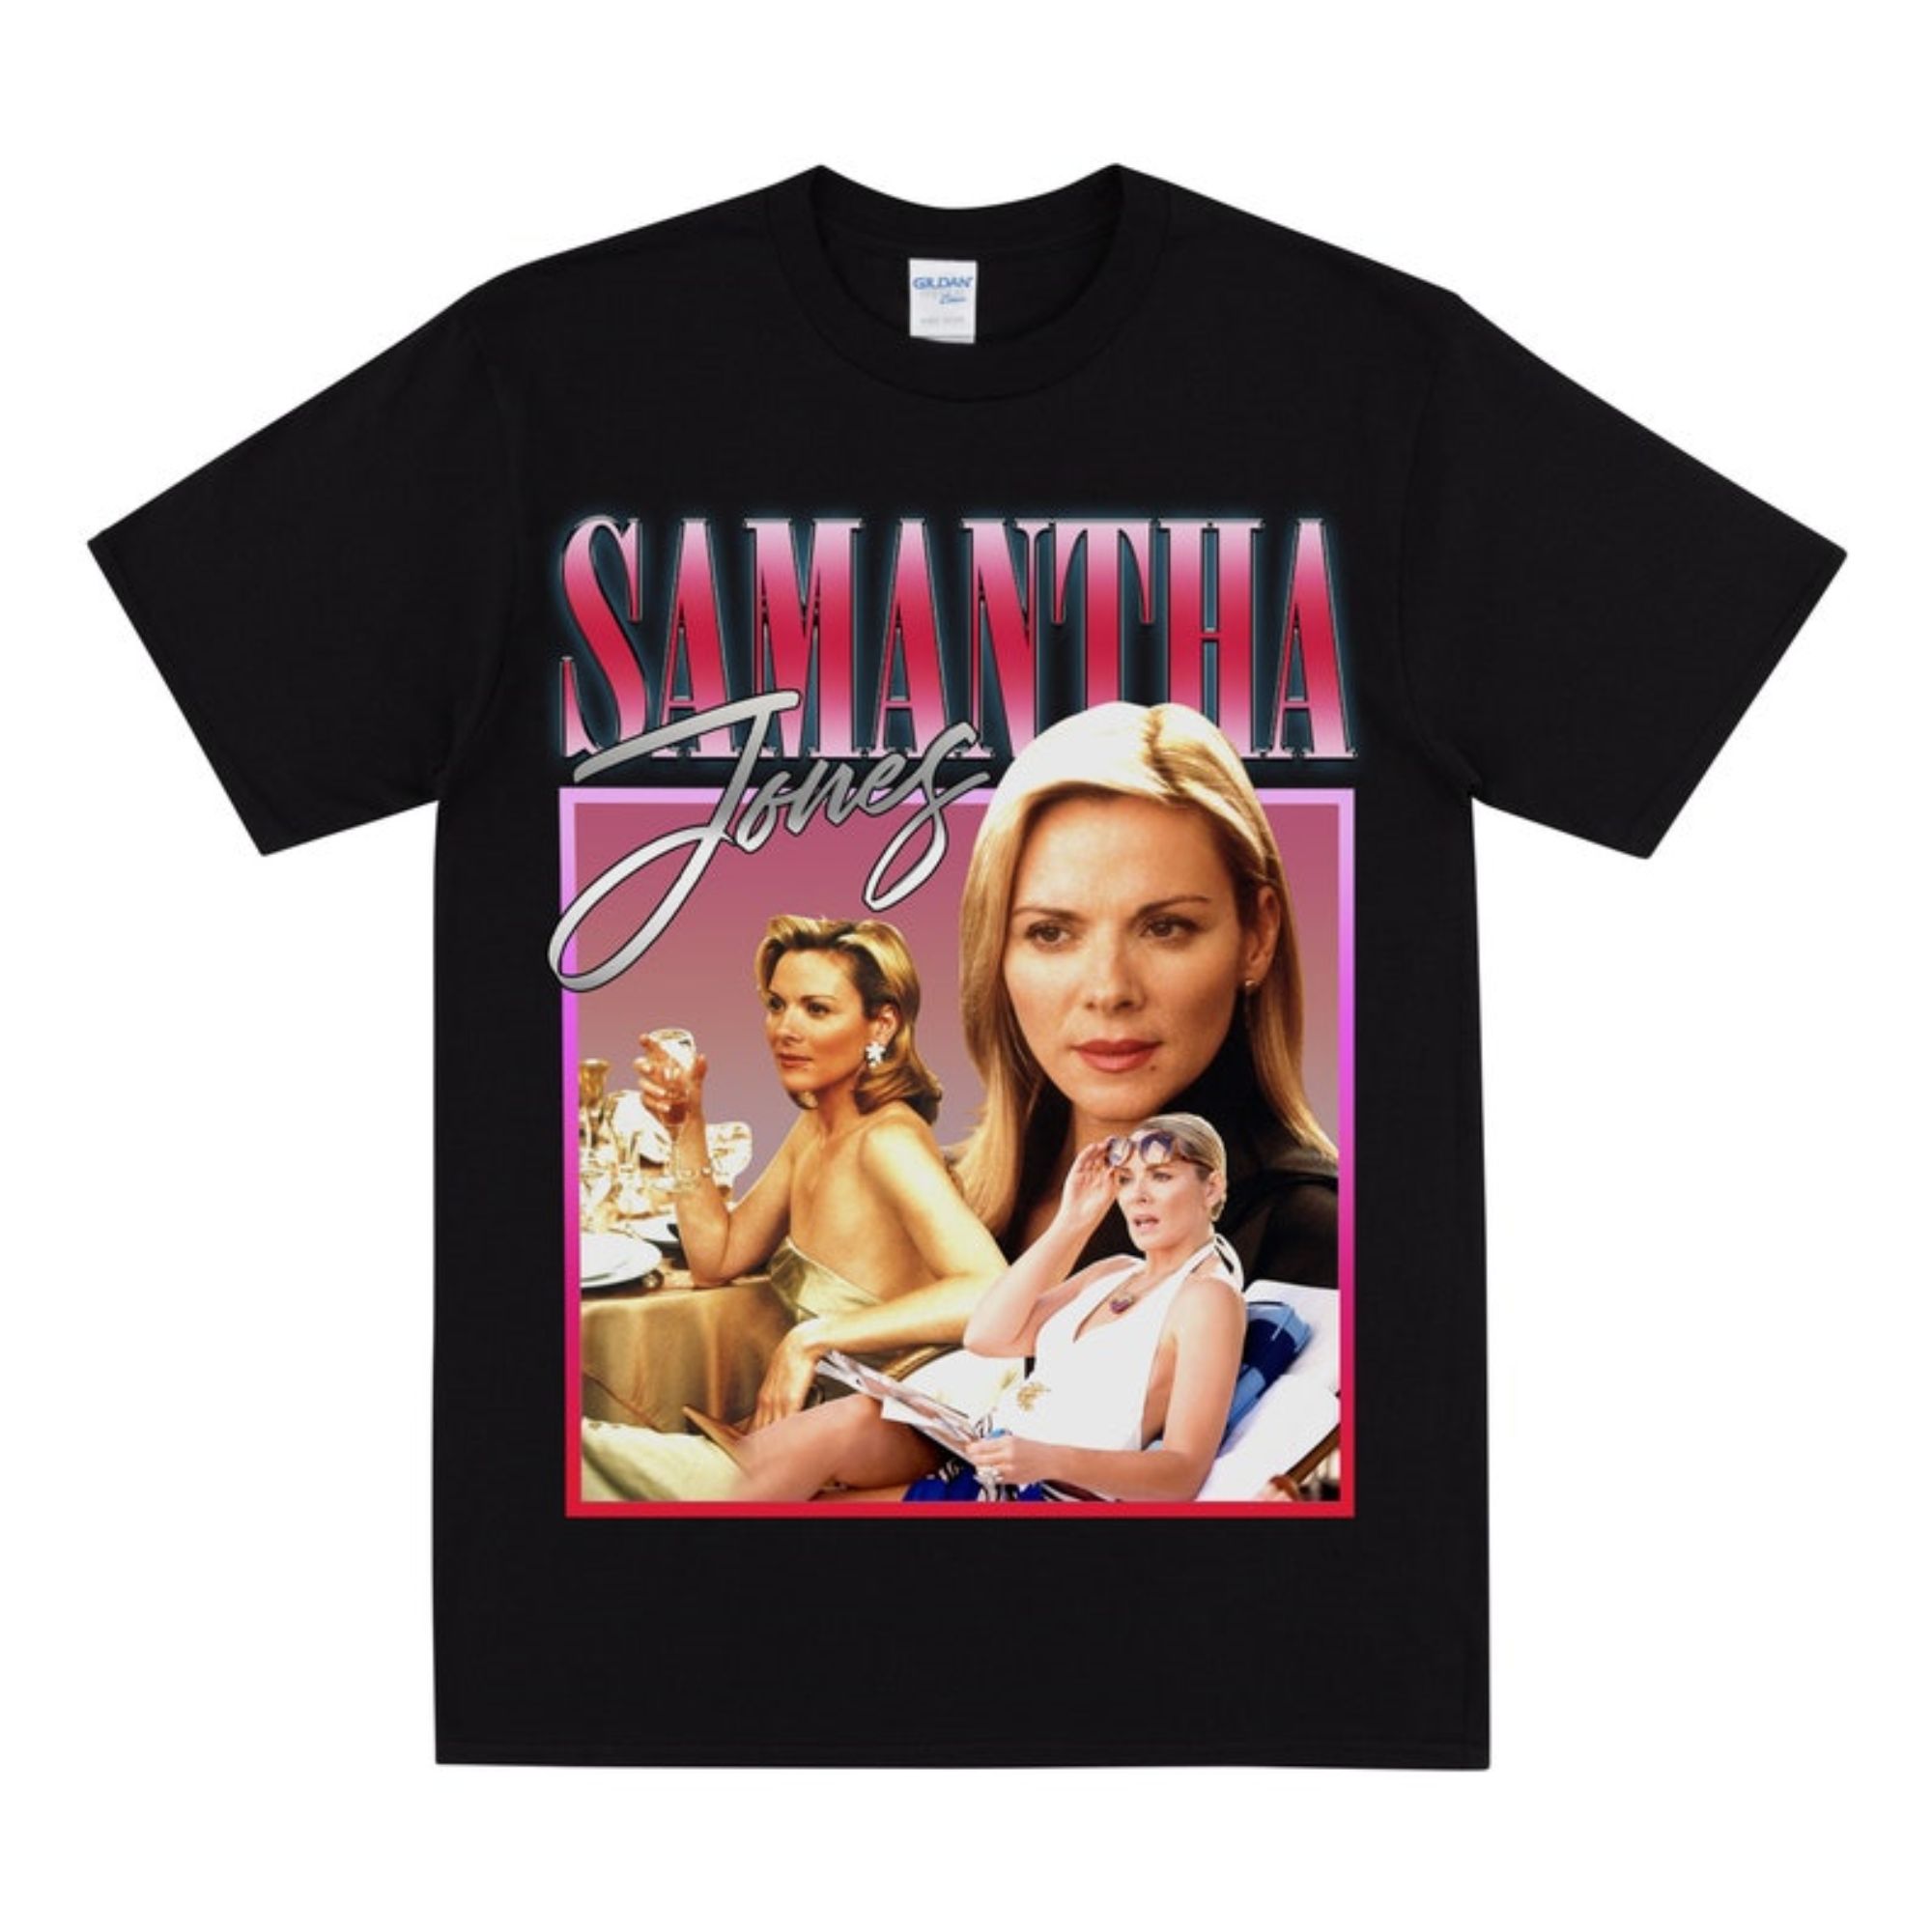 samantha from sex and the city t shirt for women for satc fans vintage 90s inspired unisex t shirt gift for wife girlfriend pic